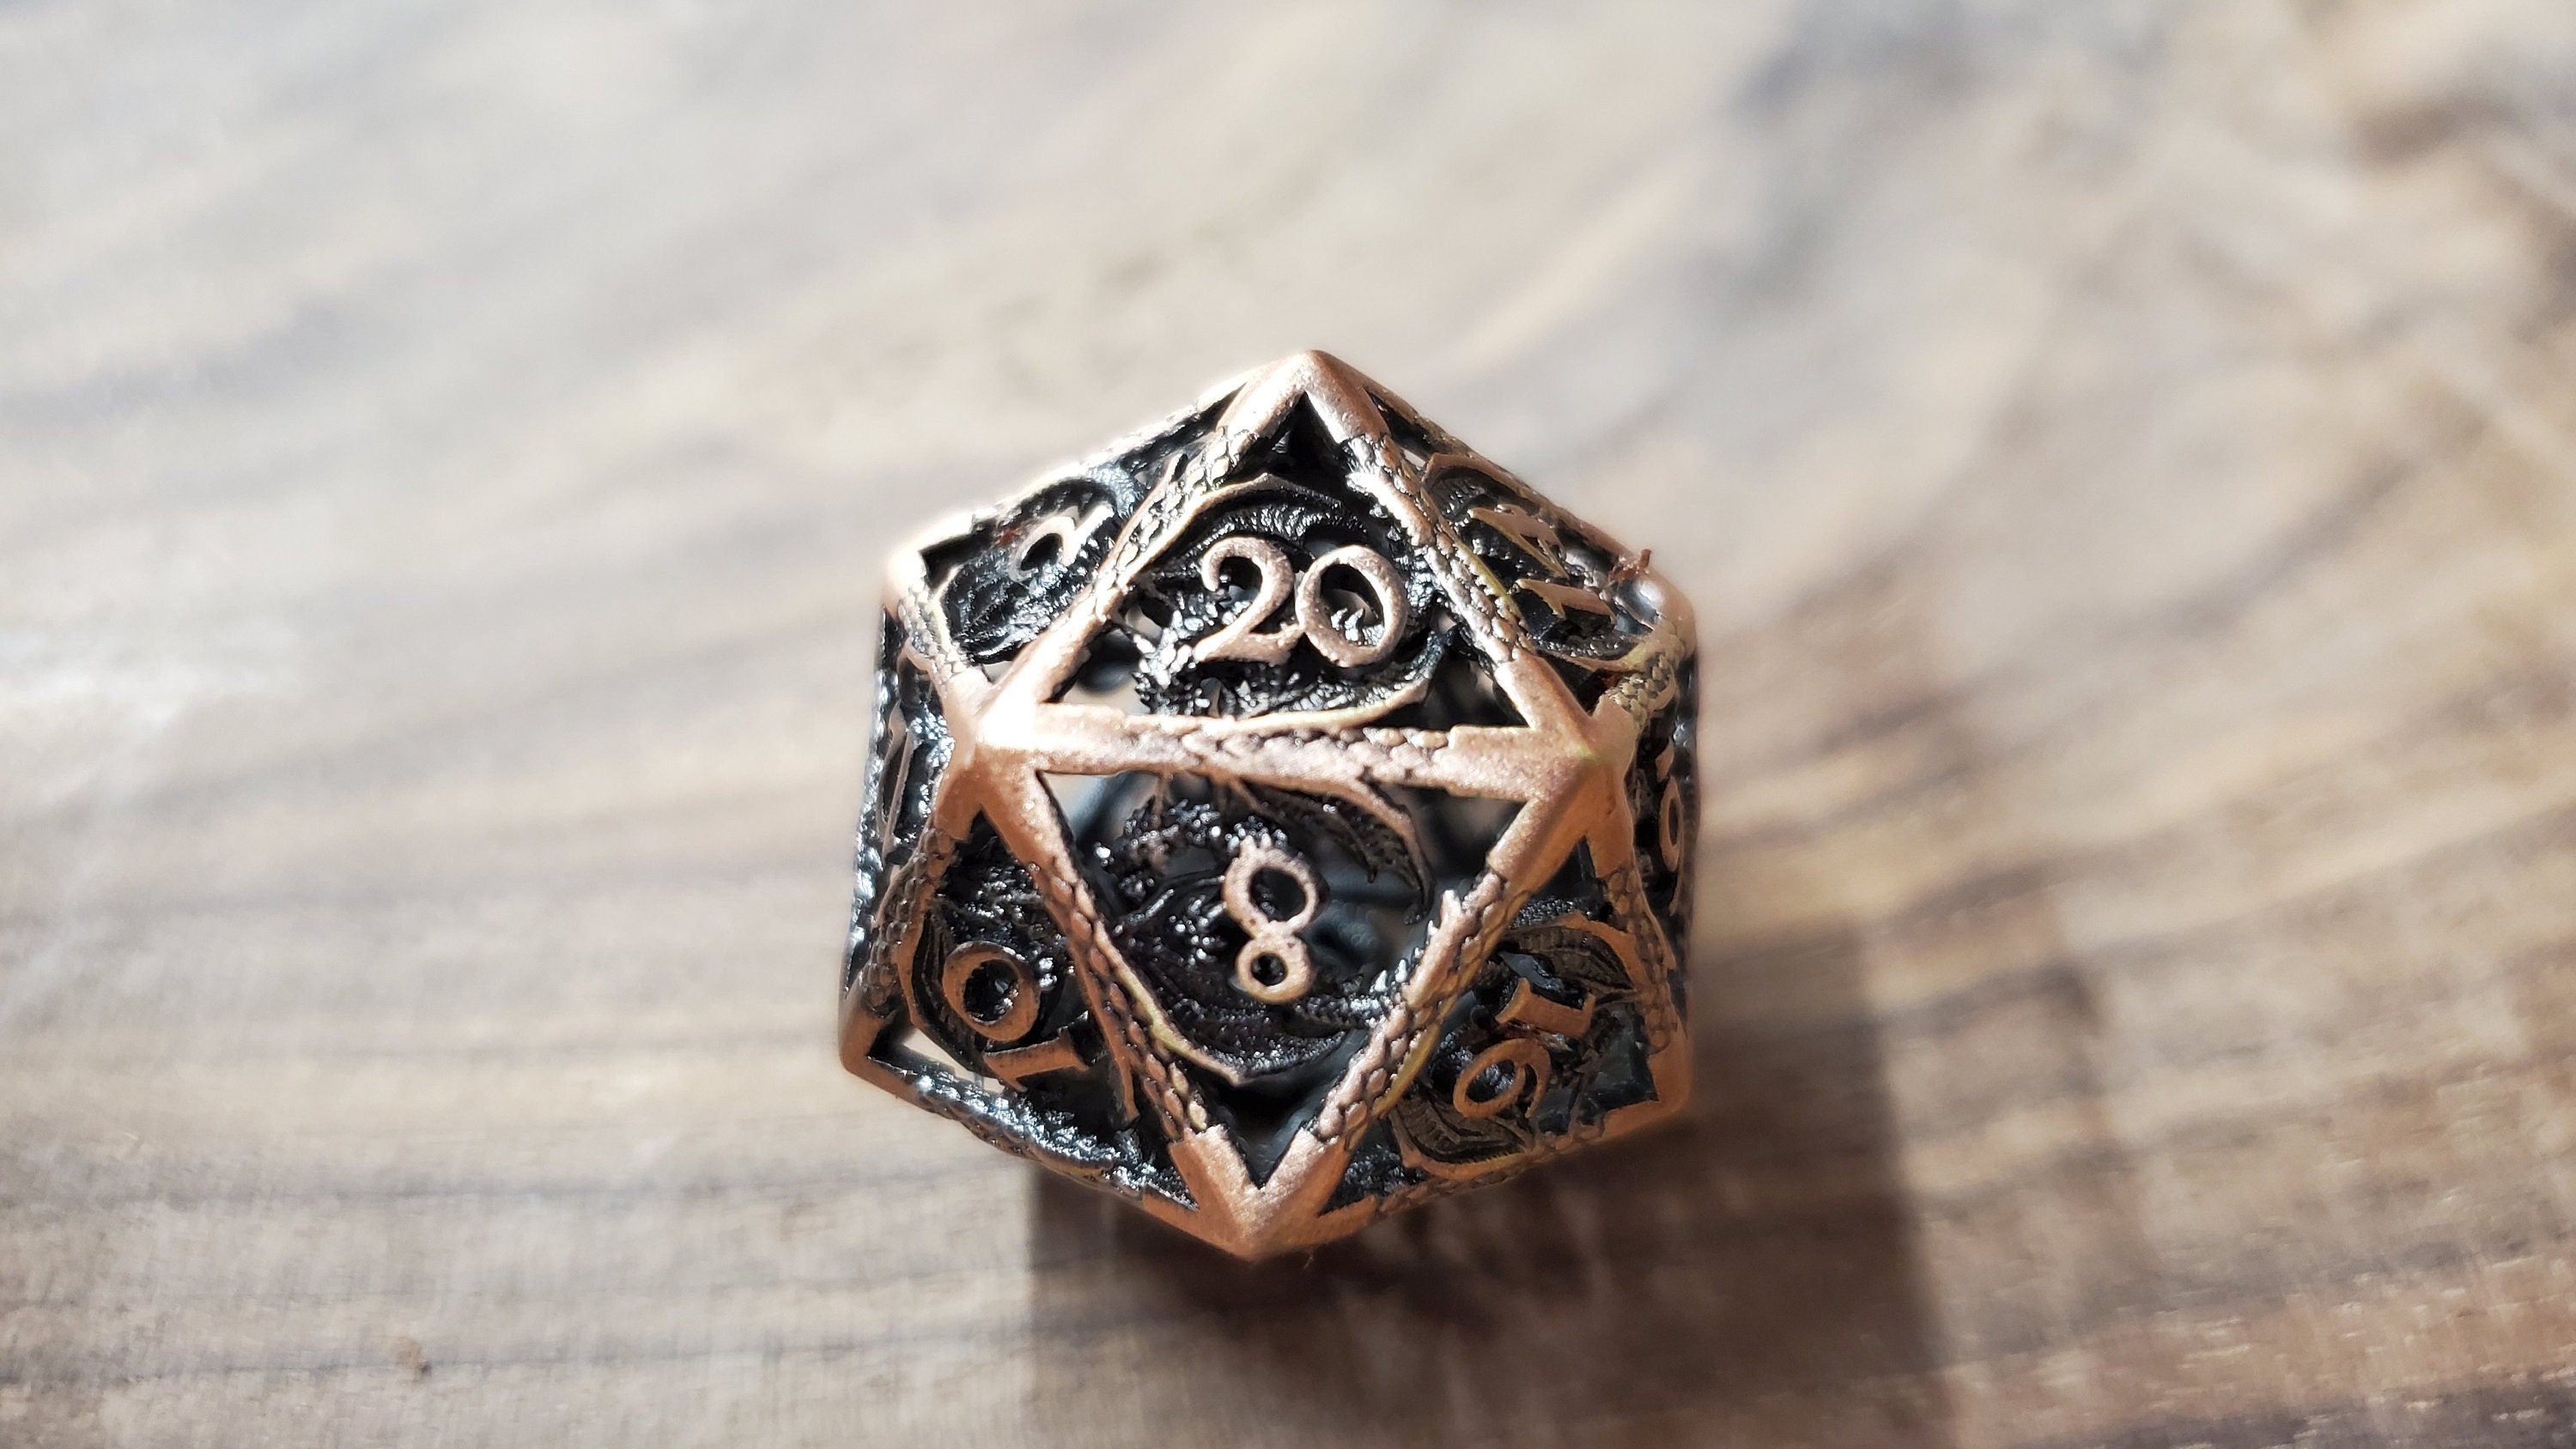 dnd dice for dungeon and dragon Solid Metal Polyhedral D/&D Dice rpg d20 dice Heavy Metal Polyhedral Dice DnD Metal Dice